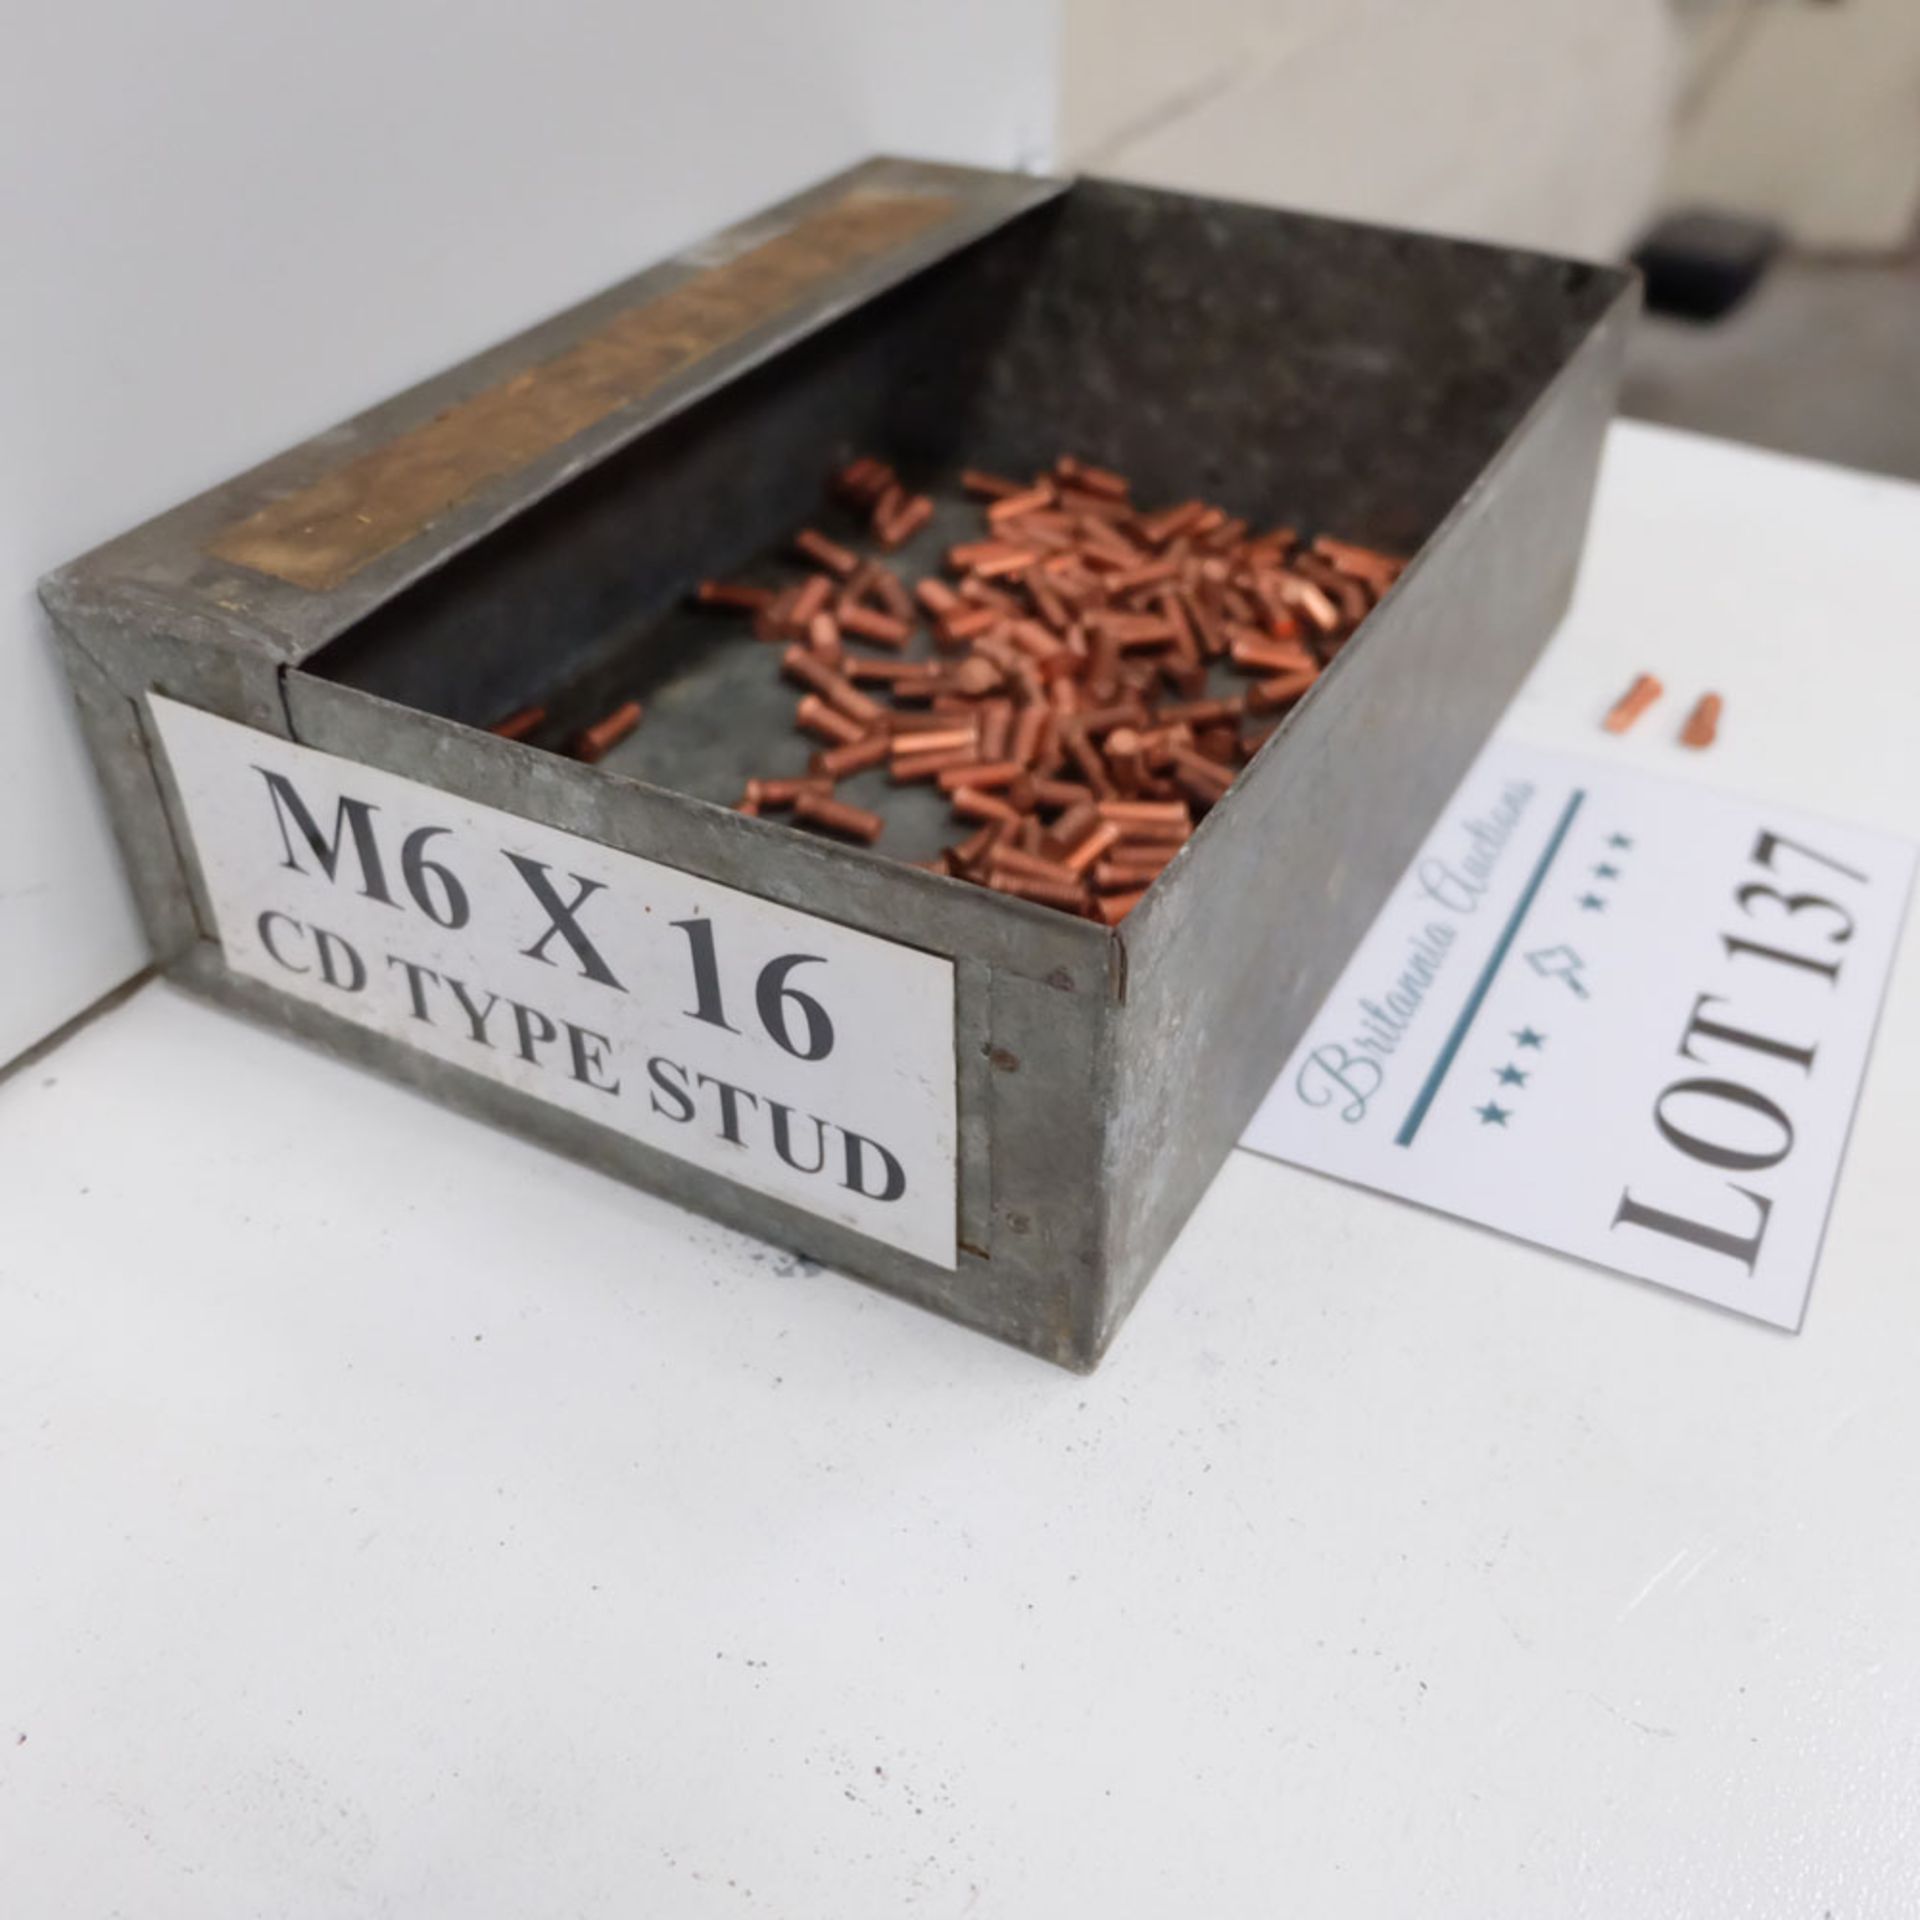 Quantity of Welding Studs as Lotted. Labelled M6 x 16 CD Type Stud. - Image 4 of 4